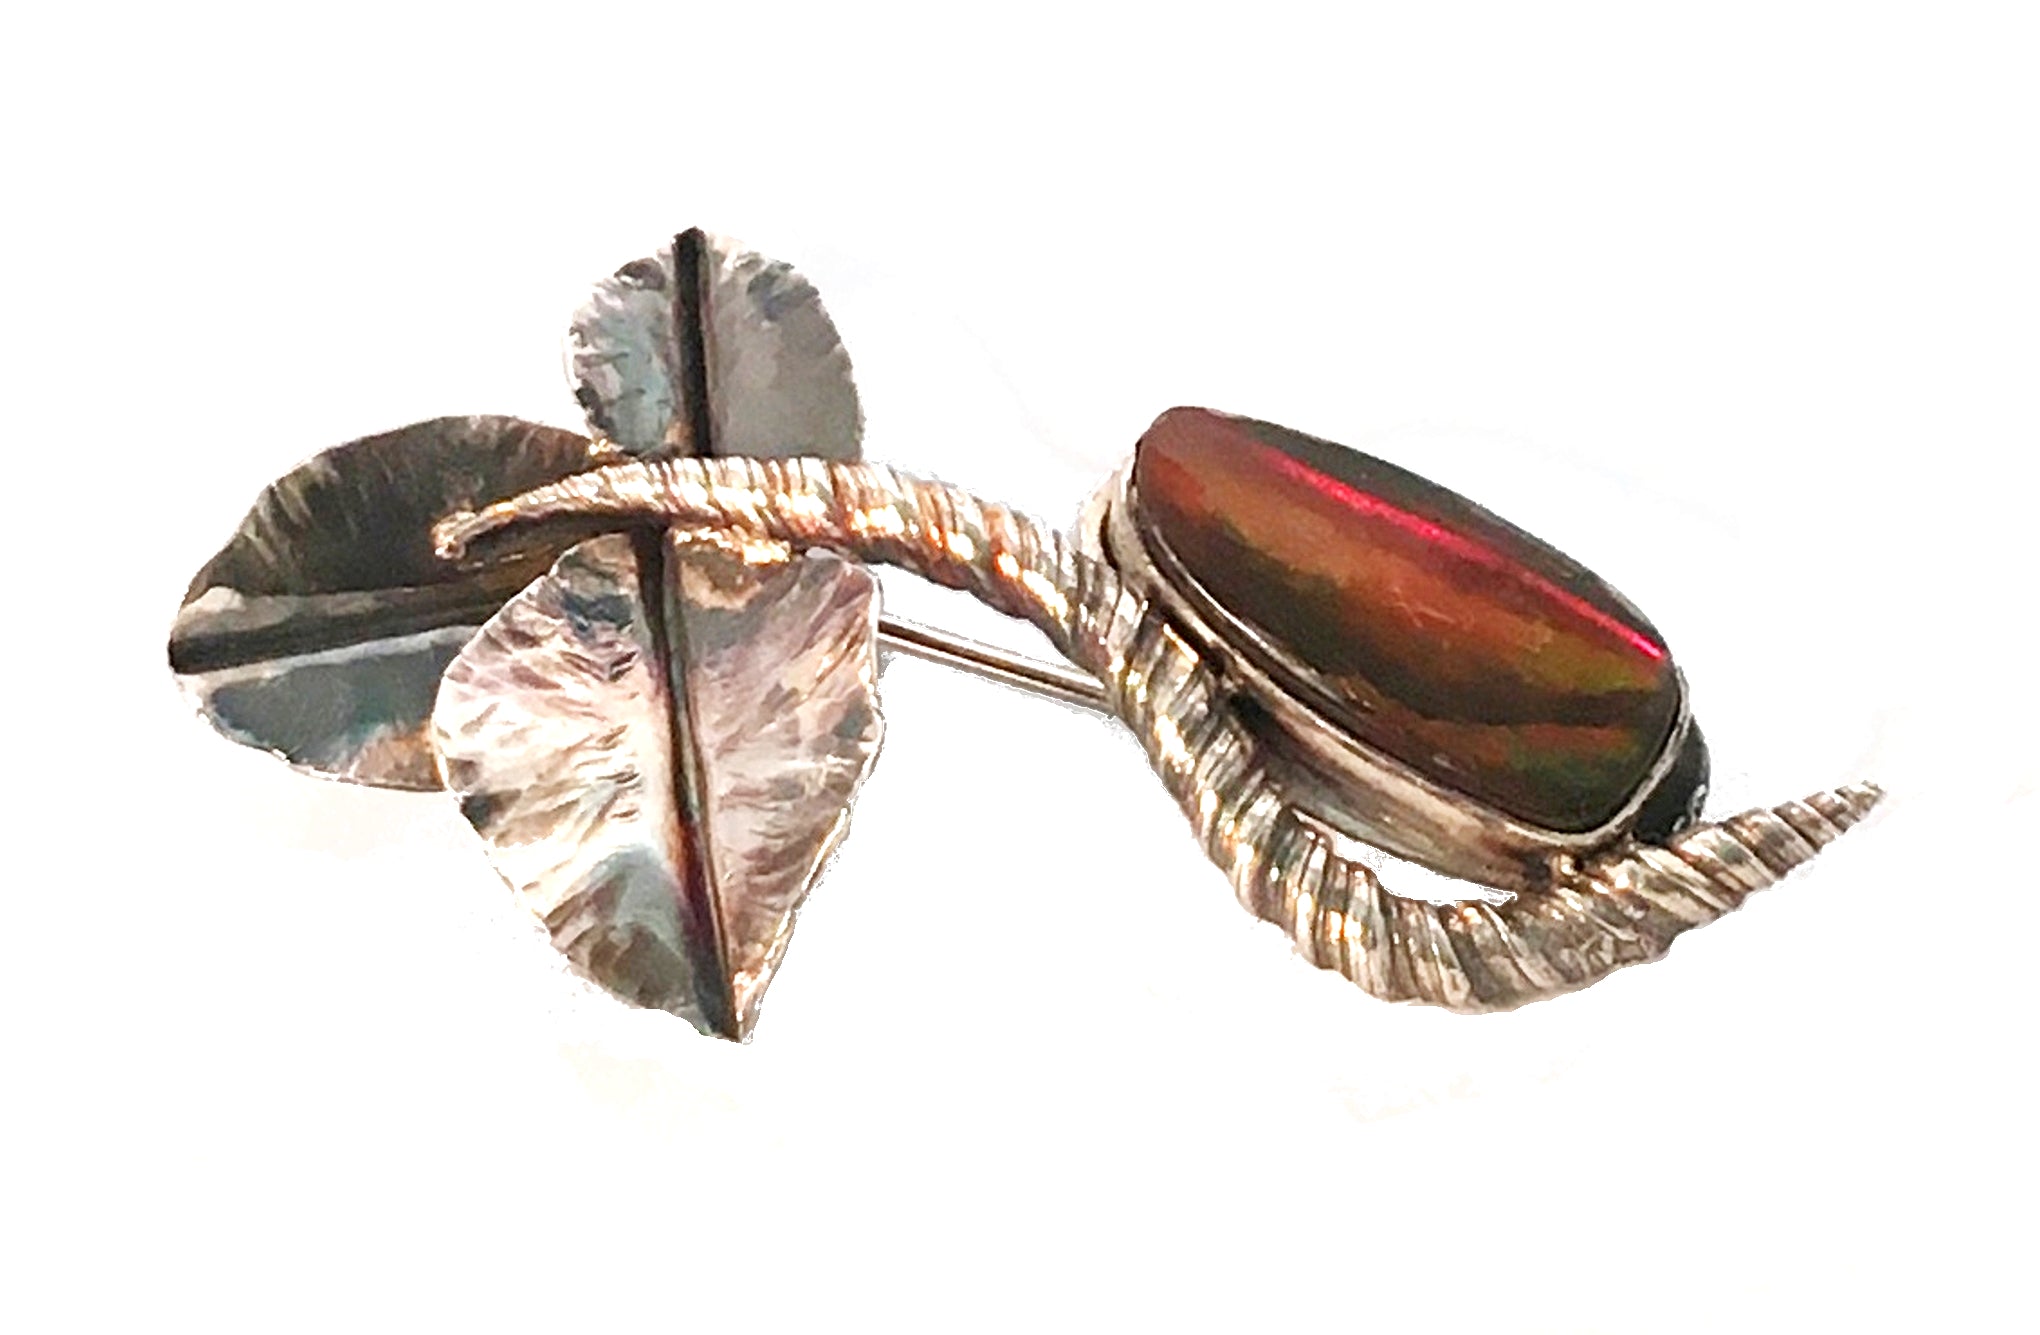 Ammolite Brooch in Sterling Silver with Hand Forged Leaves - Mitsuro Hikime Method